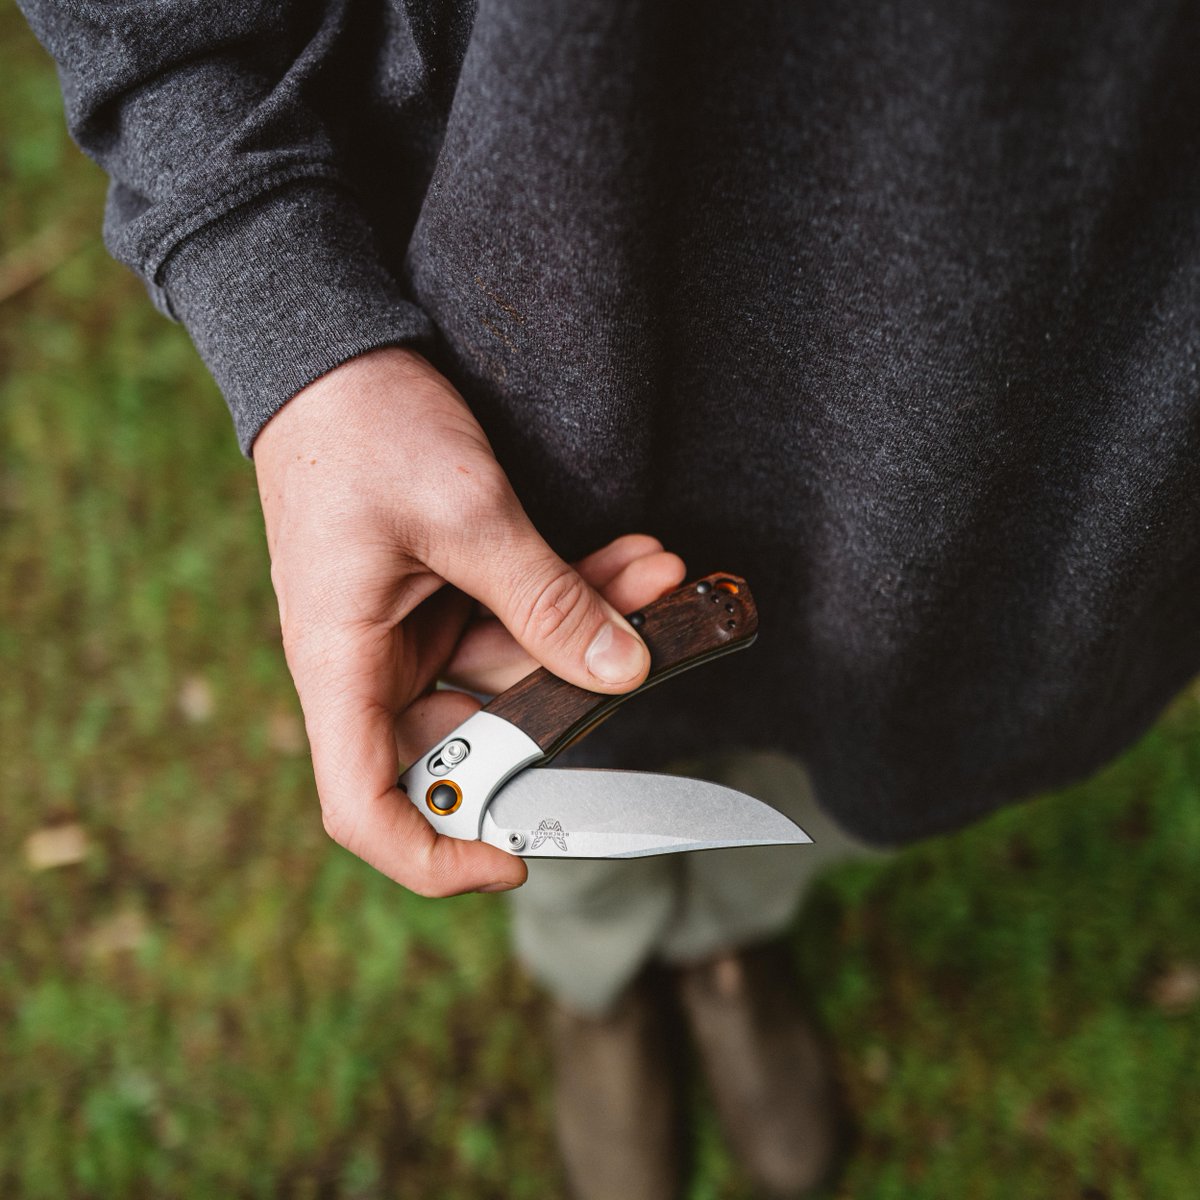 It's the Mini Crooked River Benchmade Knife! This hunting knife is designed with a stabilized wood handle and steel blade. Great for hands-on projects, hunting trips, and outdoor adventures, you'll be glad to have this versatile tool with you! 

waltsoutdoorworld.com #Benchmade